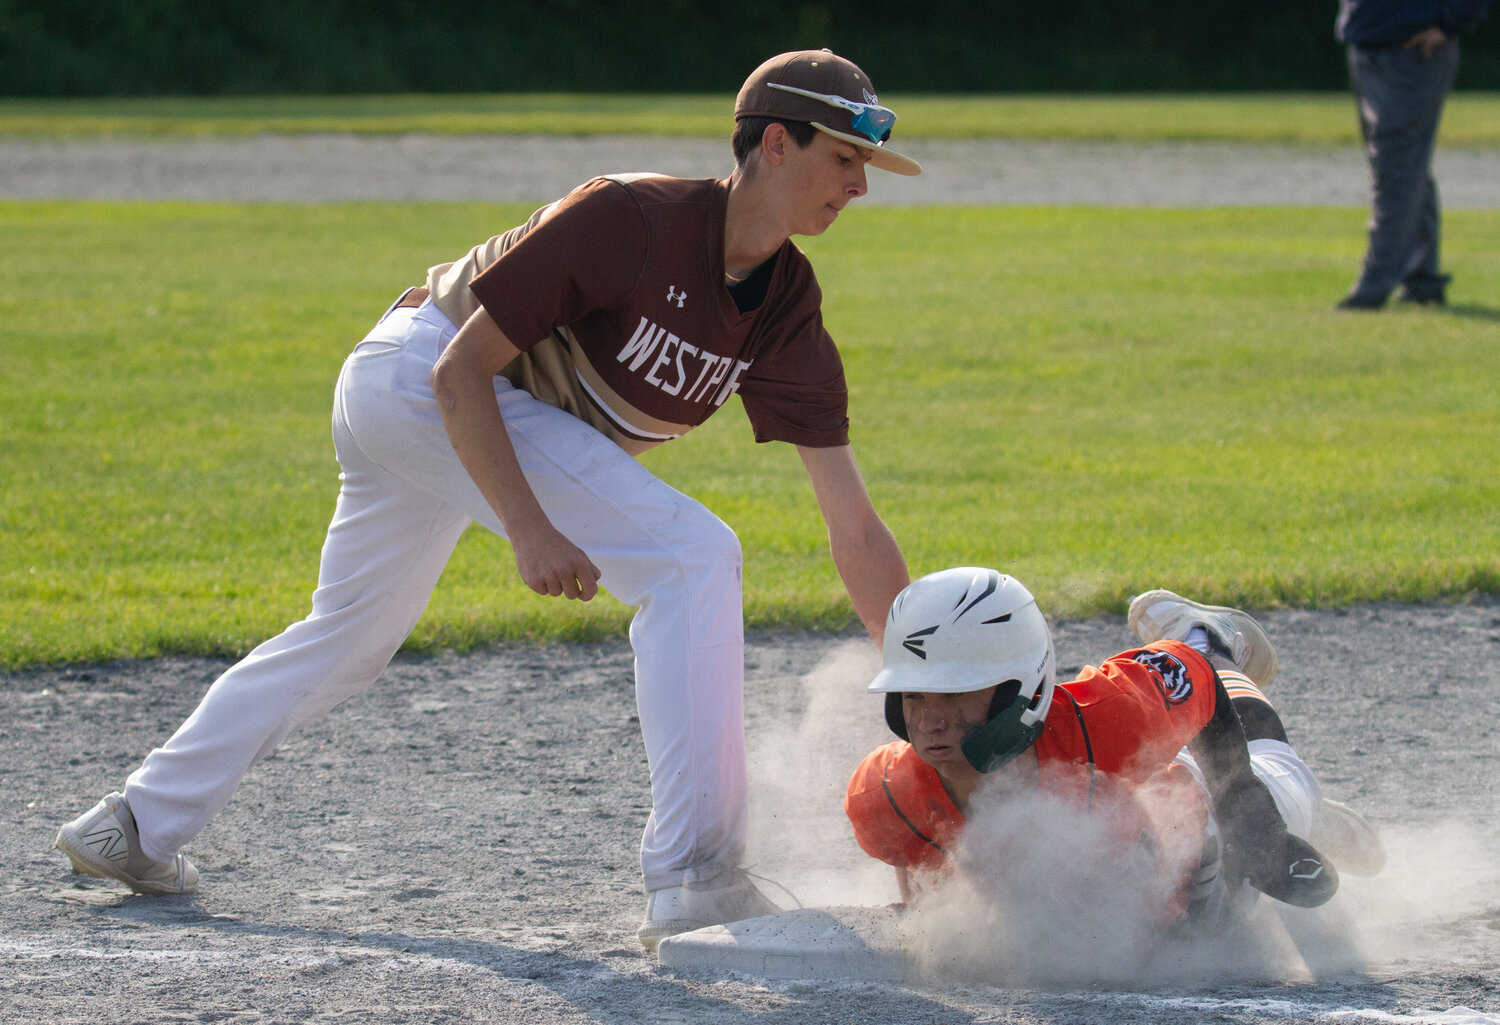 First baseman Luke Finglas tags a Diman runner during the Wildcats’ 8-0 home win over Diman on Tuesday.